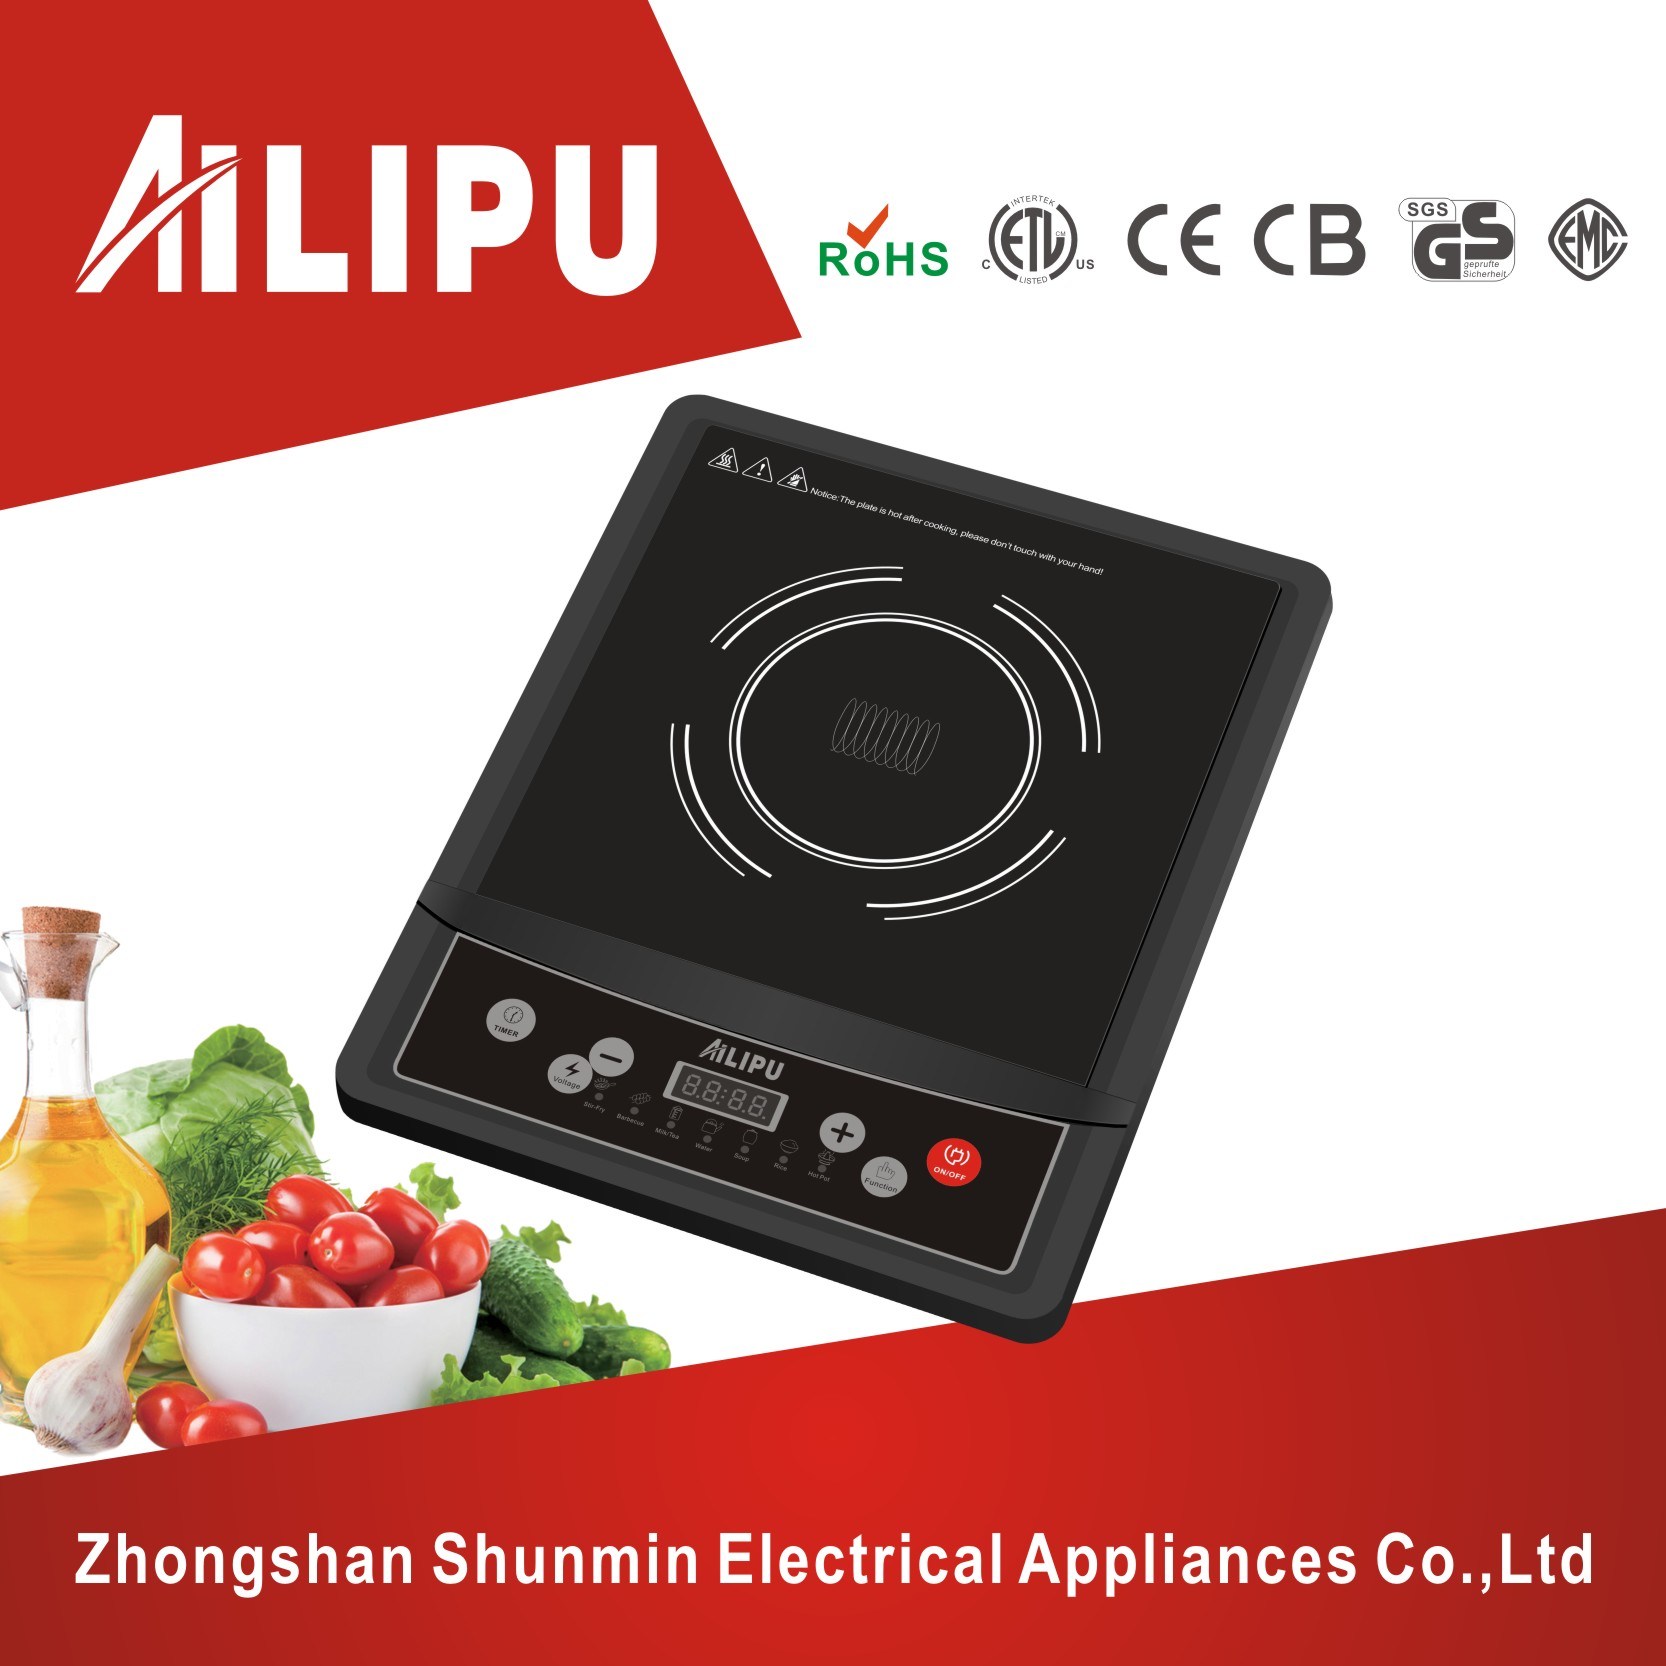 CB Certificate with Plastic Housing Push Button Induction Cooker (SM20-A57)